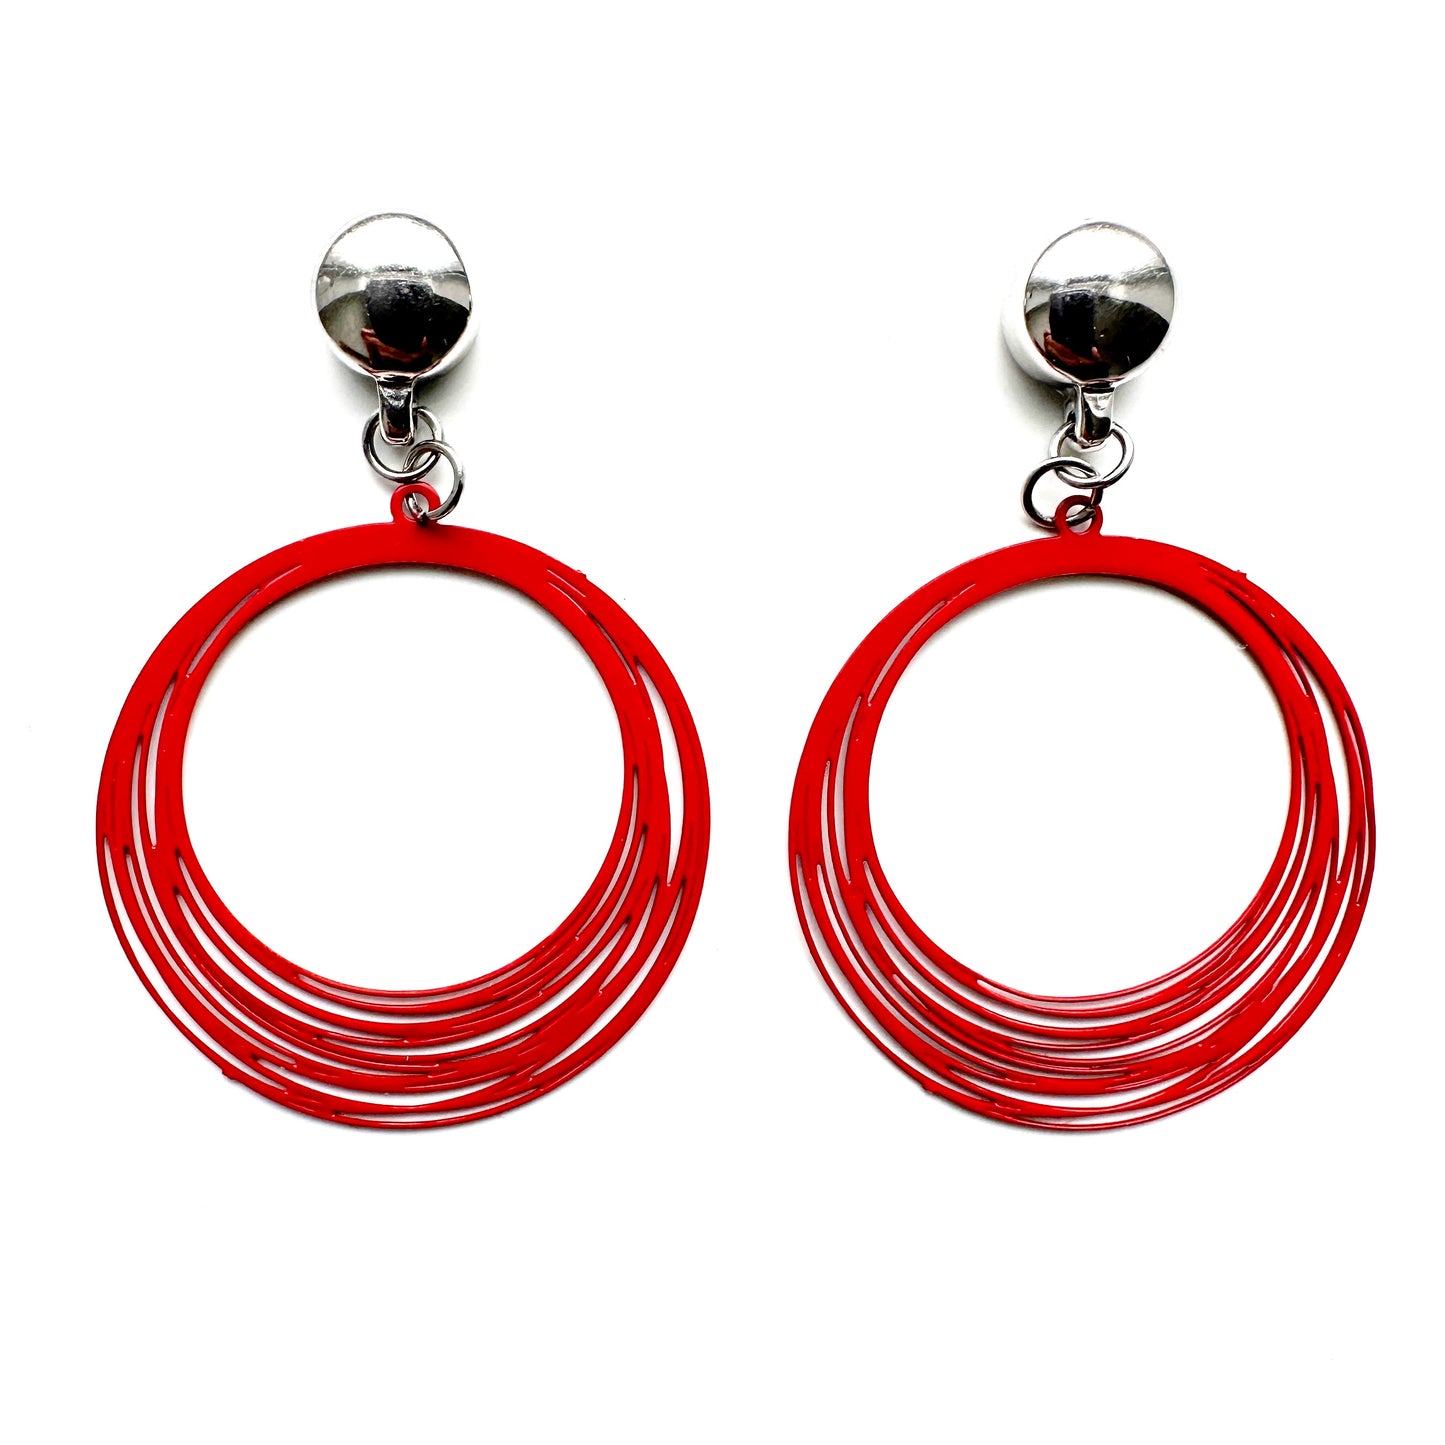 TI-GO Black / Red String Rings earring. Magnetic titanium interchangeable earring system. Detachable earrings for a truly hypoallergenic jewellery on a white background. red